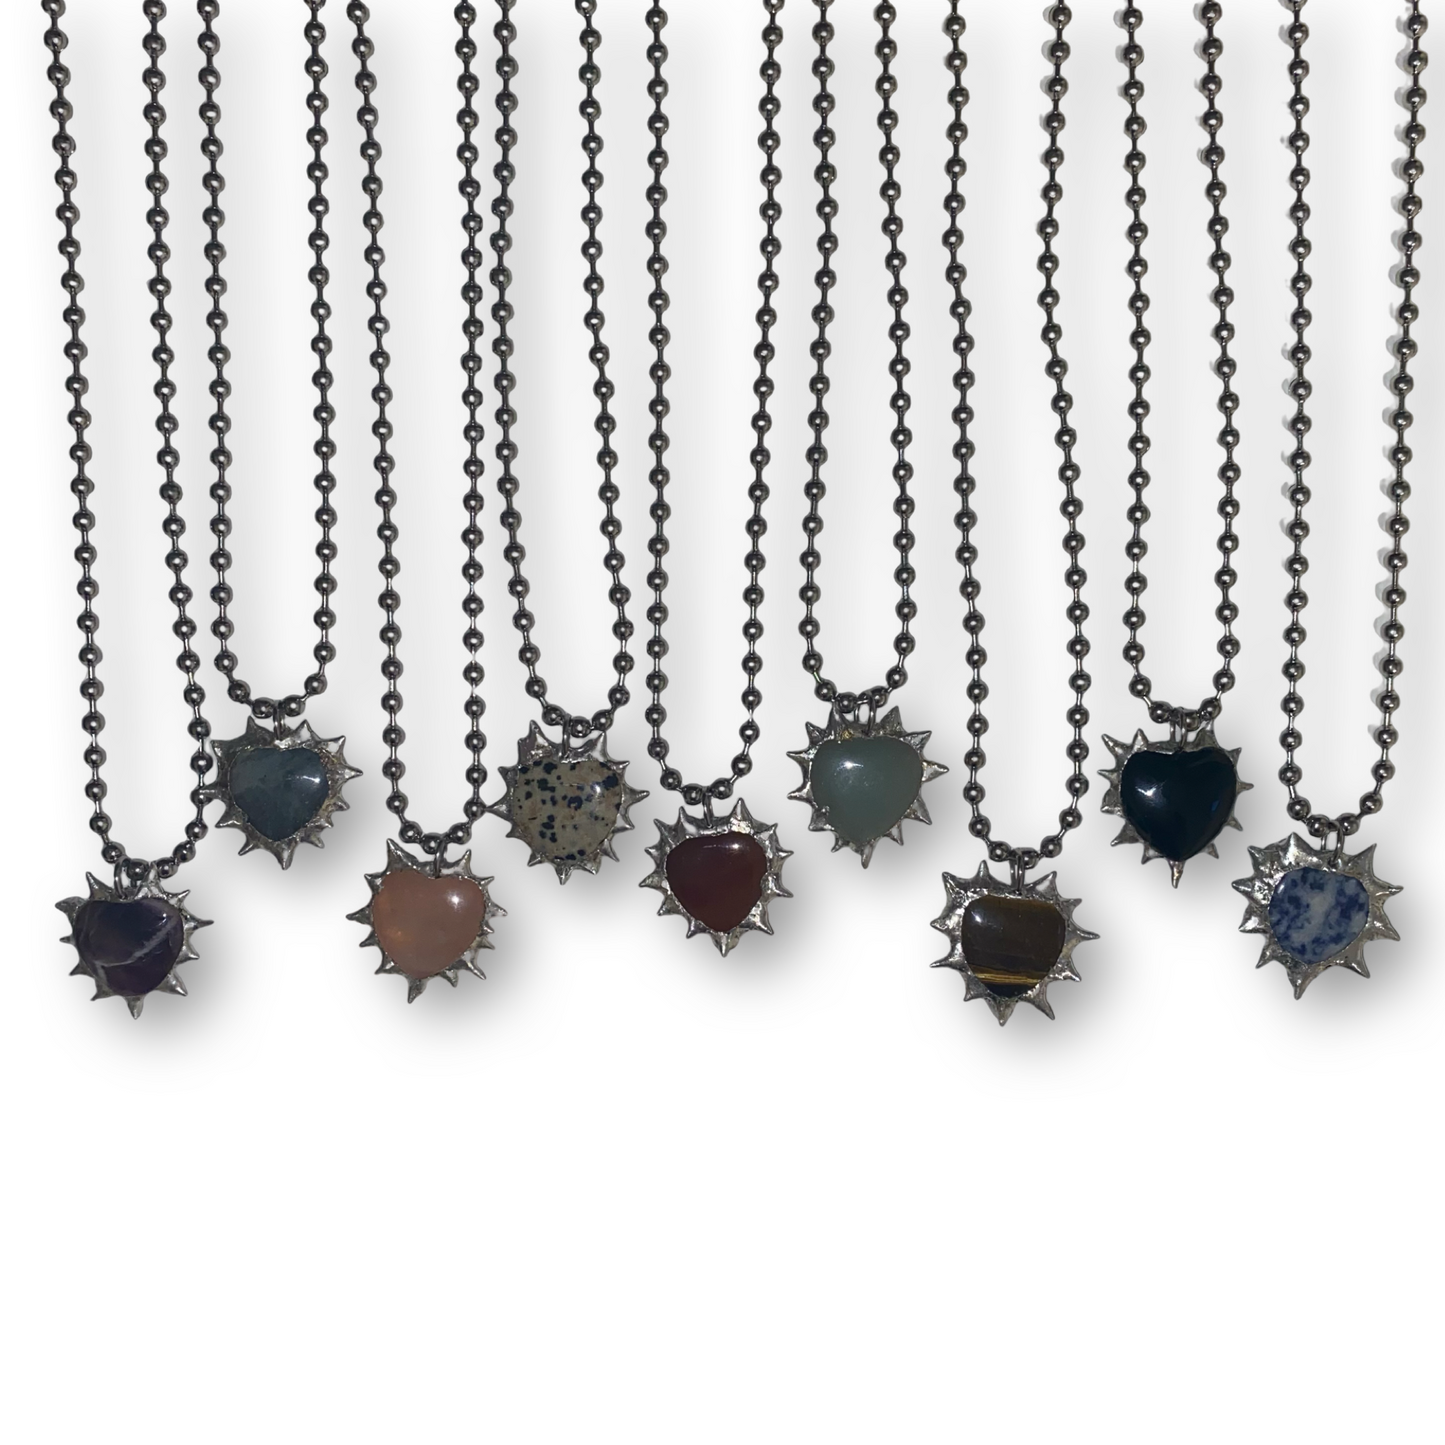 The Spiky Crystal Heart Necklace